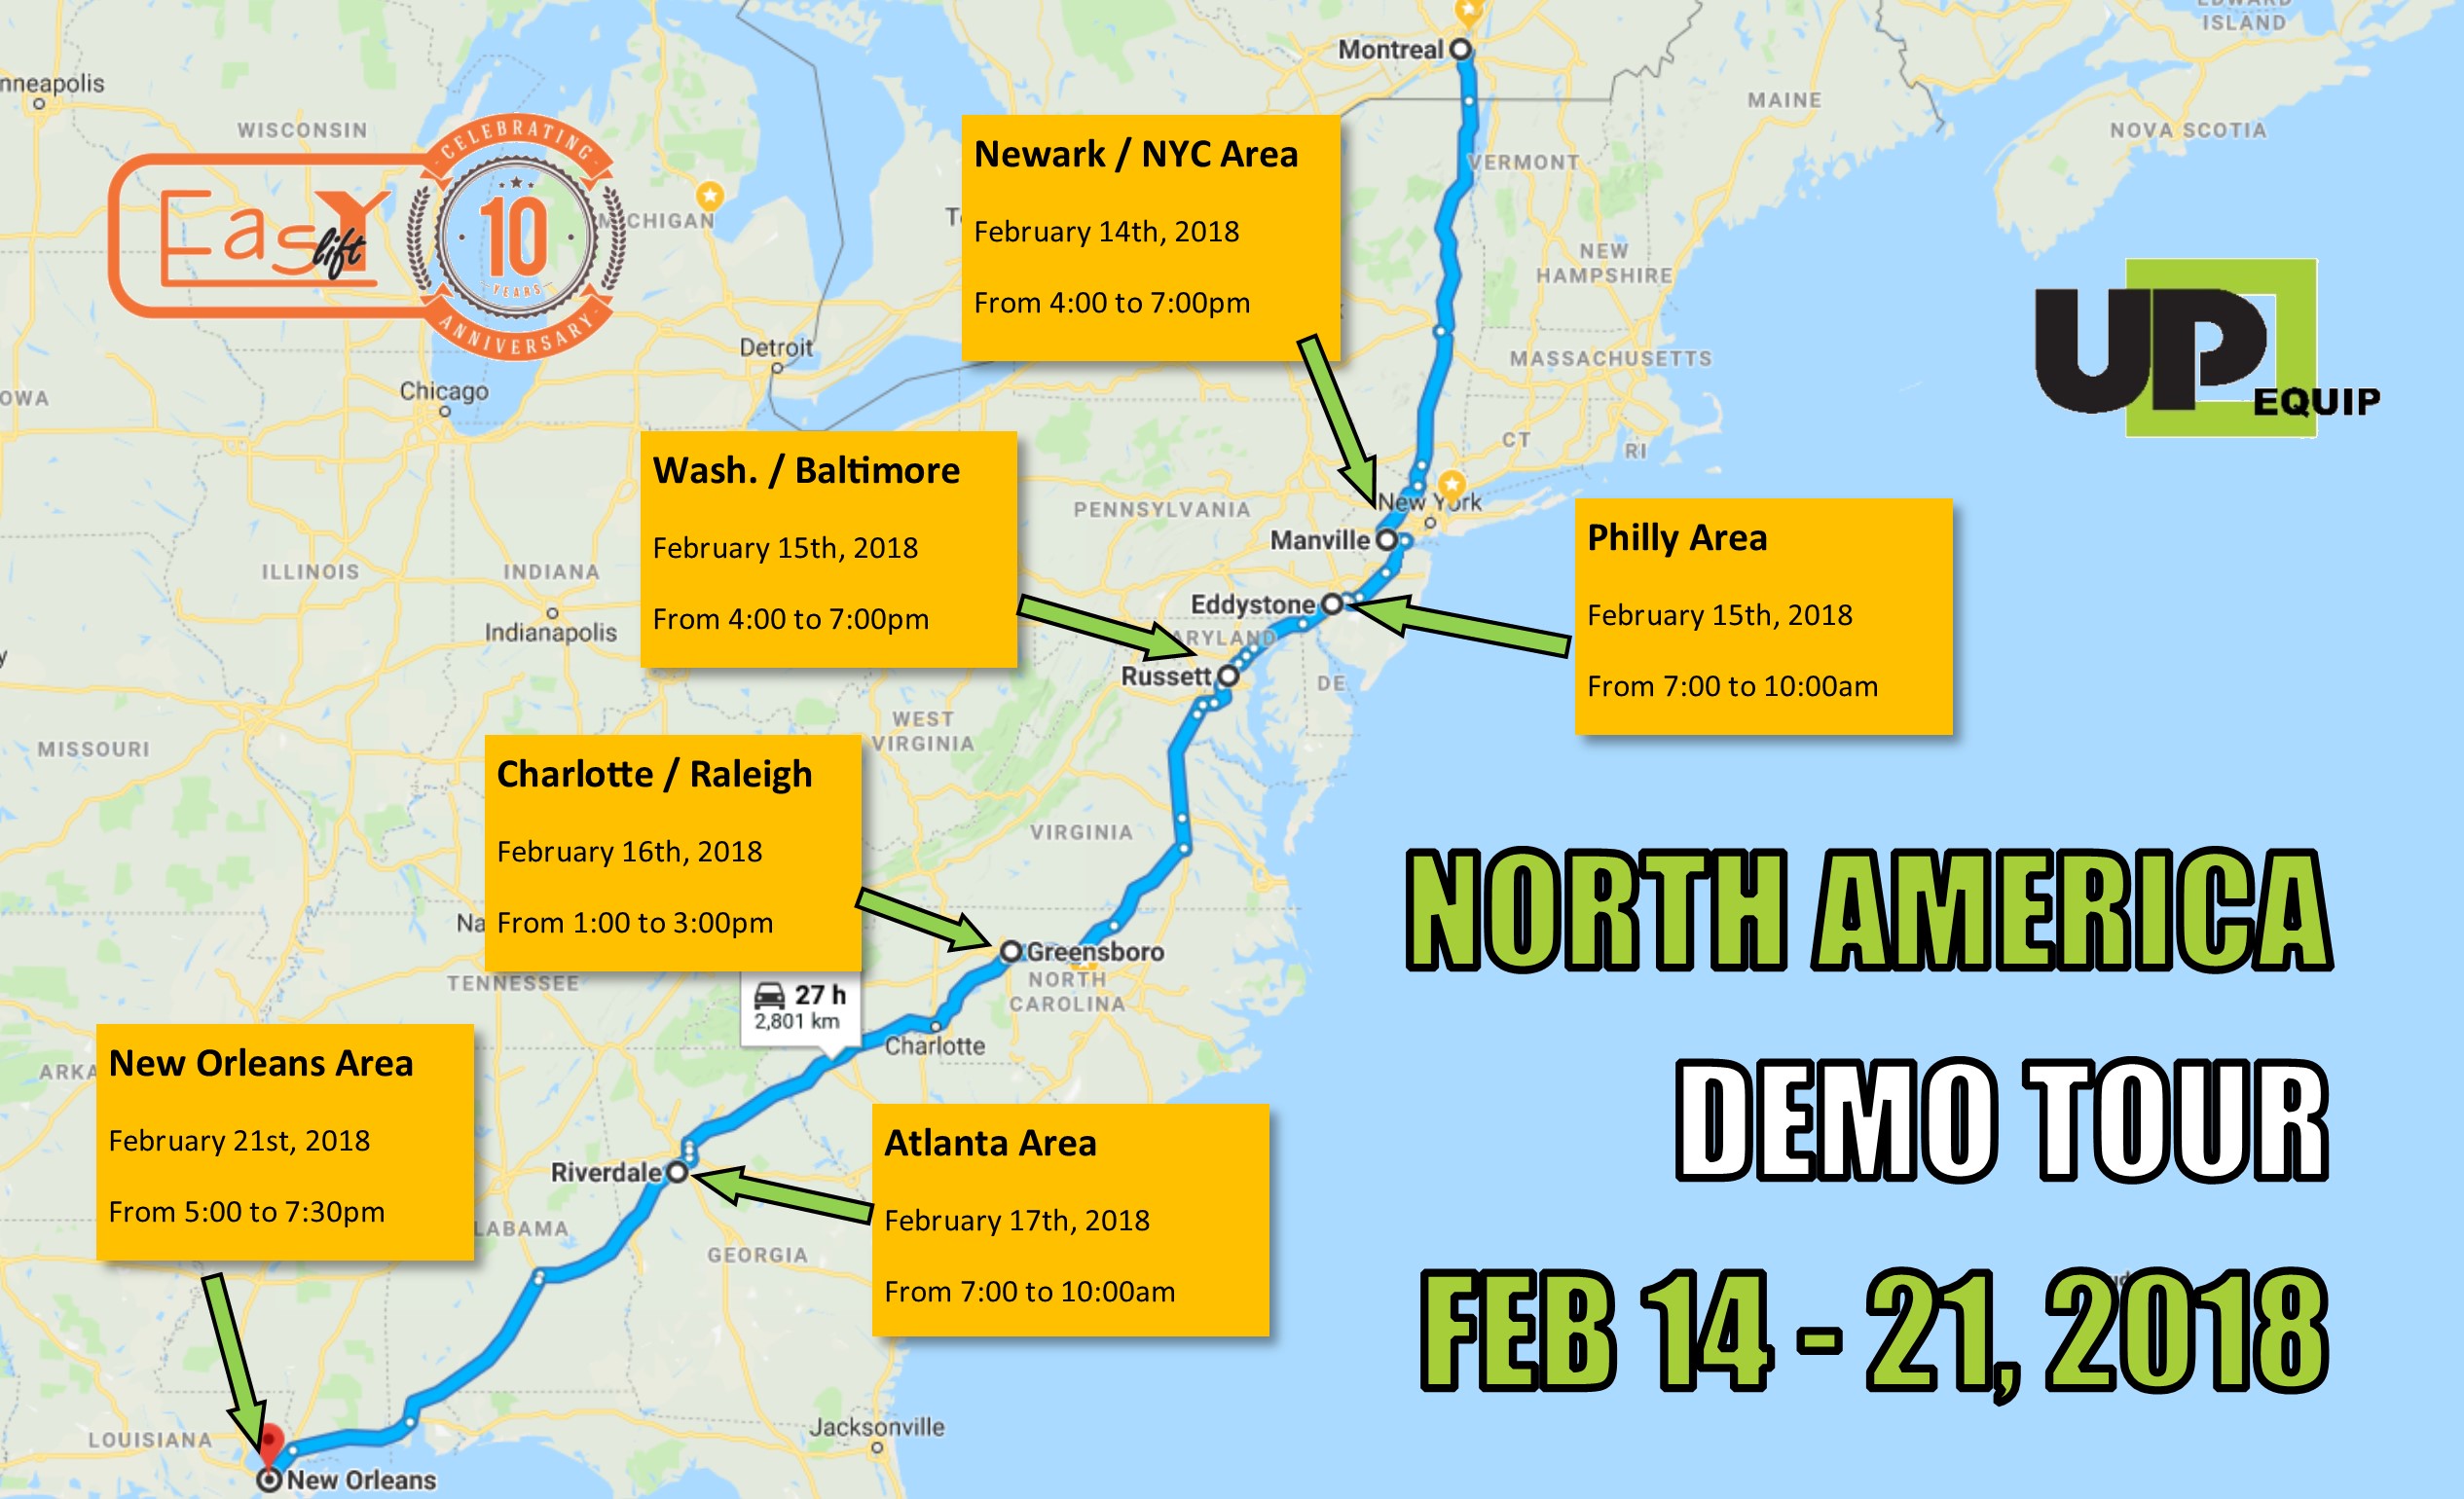 Demo Tour - Heading down to New Orleans